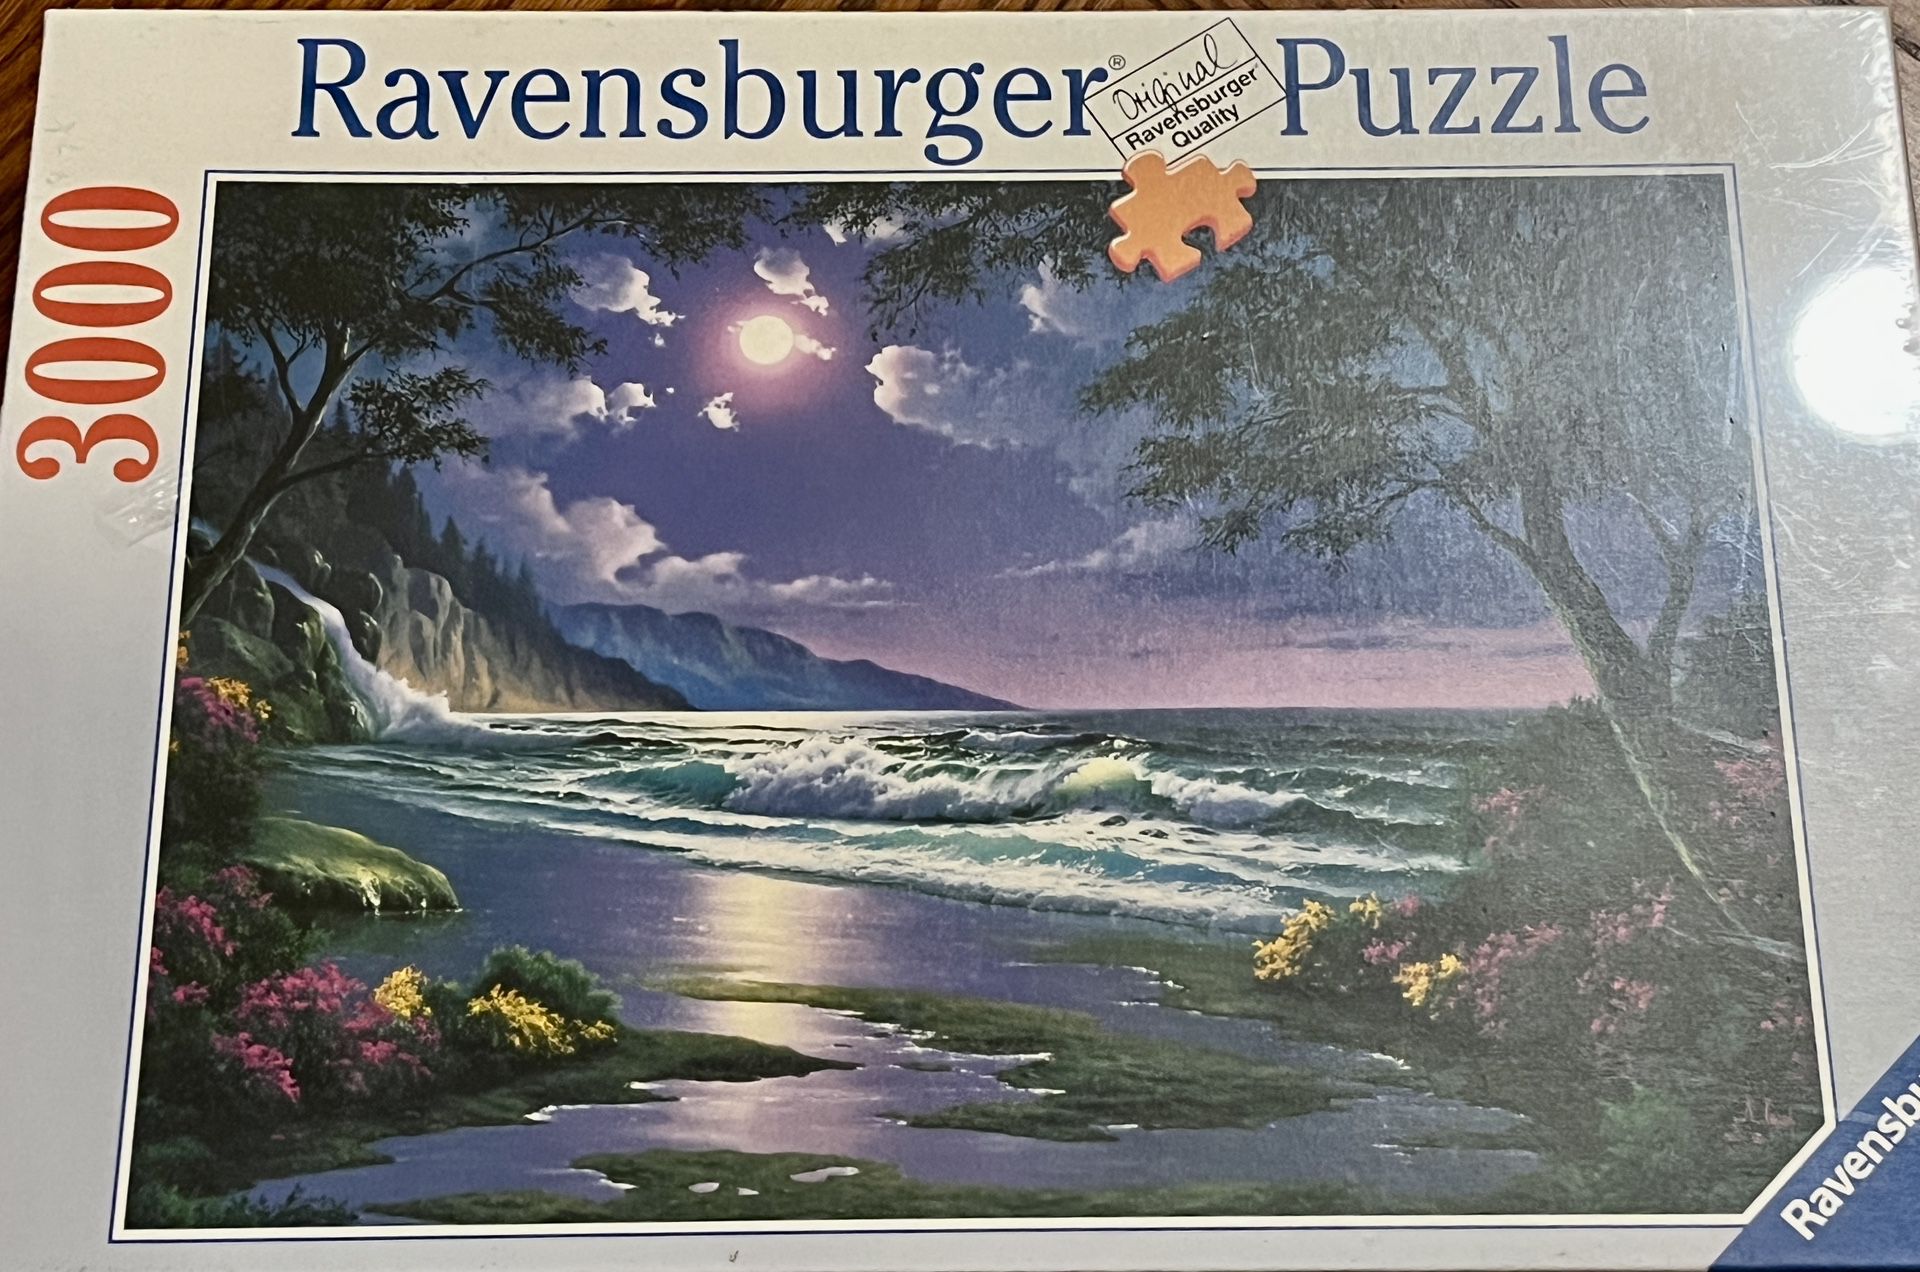 Ravensburger Puzzle 3000 Piece Moonlight Beach Anthony Casay 1997 